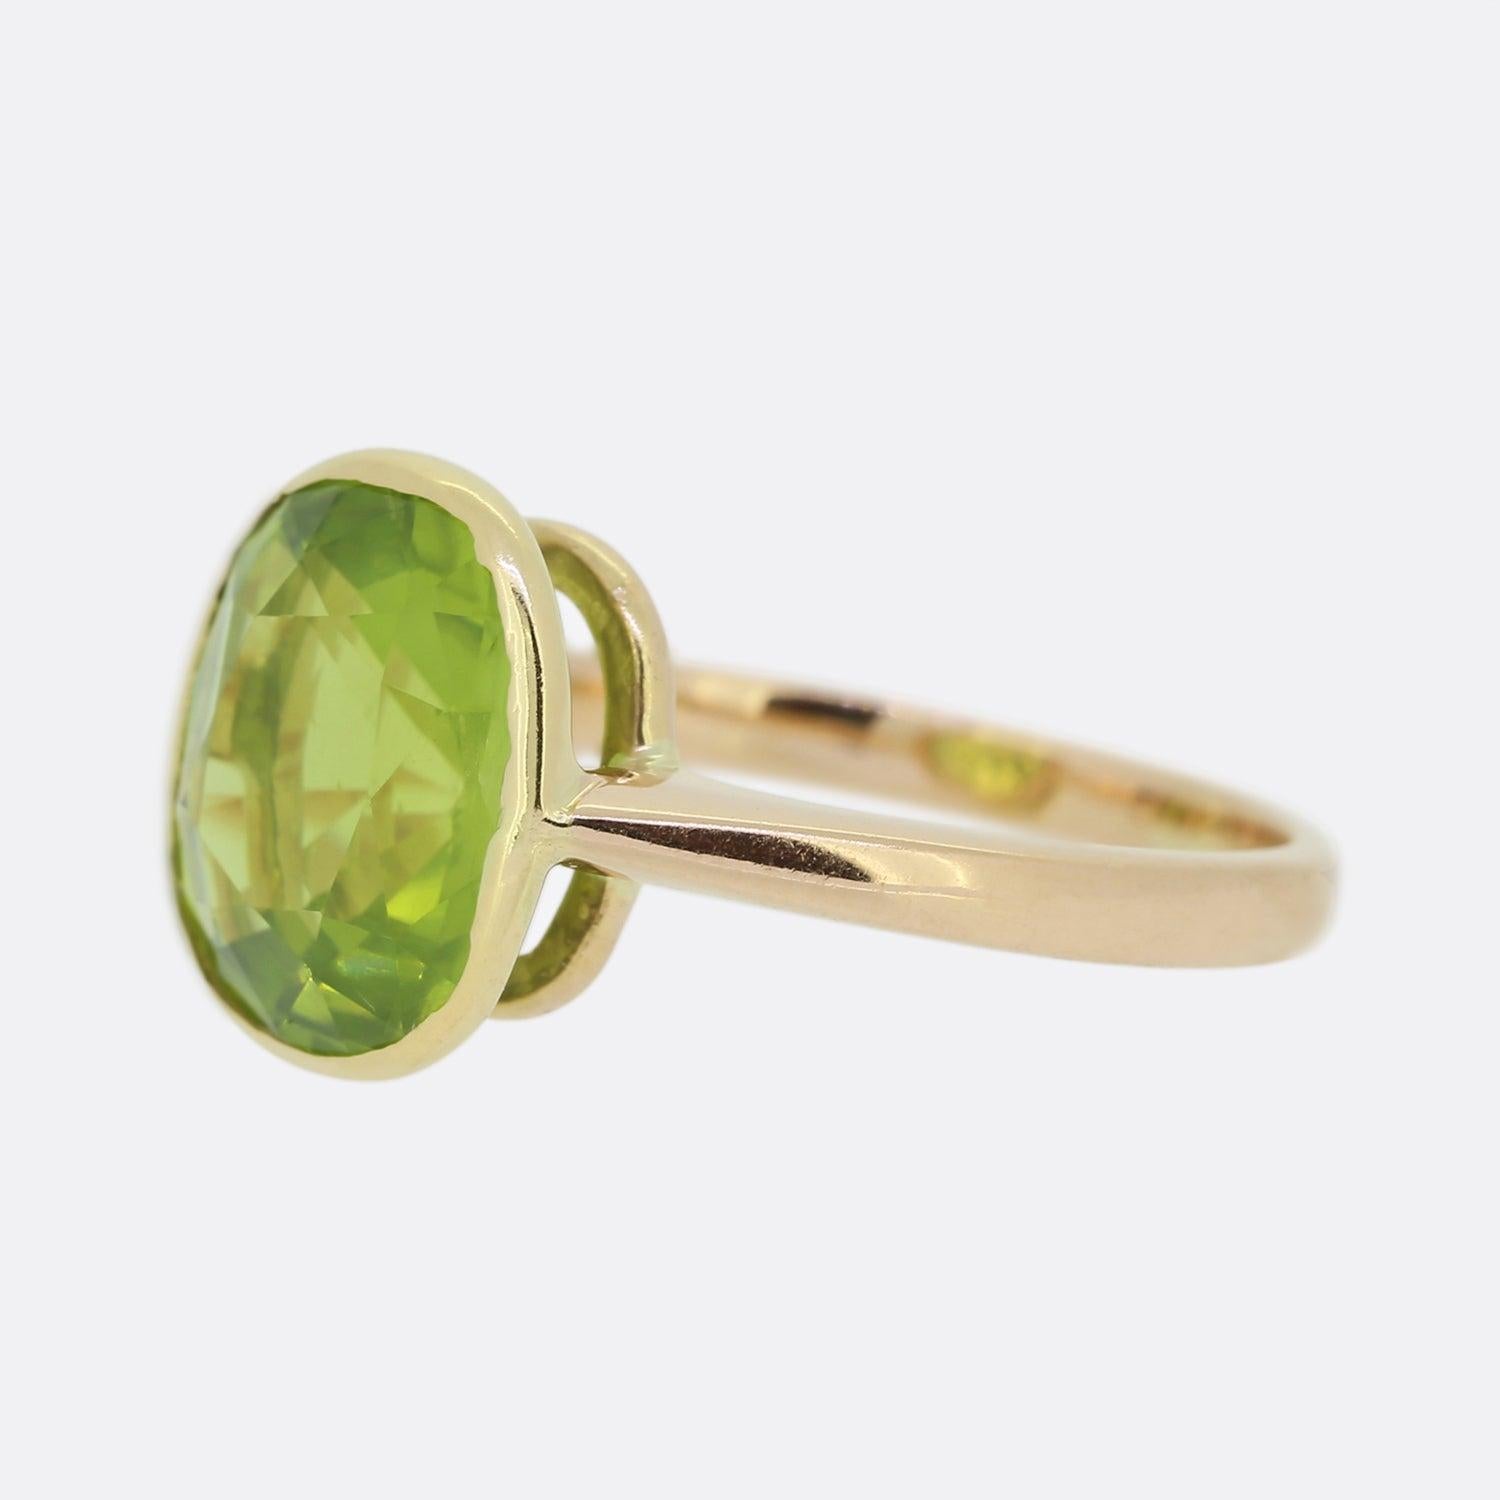 Here we have an 18ct rose gold peridot solitaire. The centralised peridot is a large oval shaped stone possessing an intense lime green hue which sits openly in a rub-over setting allowing the entire depth of the stone to be admired. 

Condition: